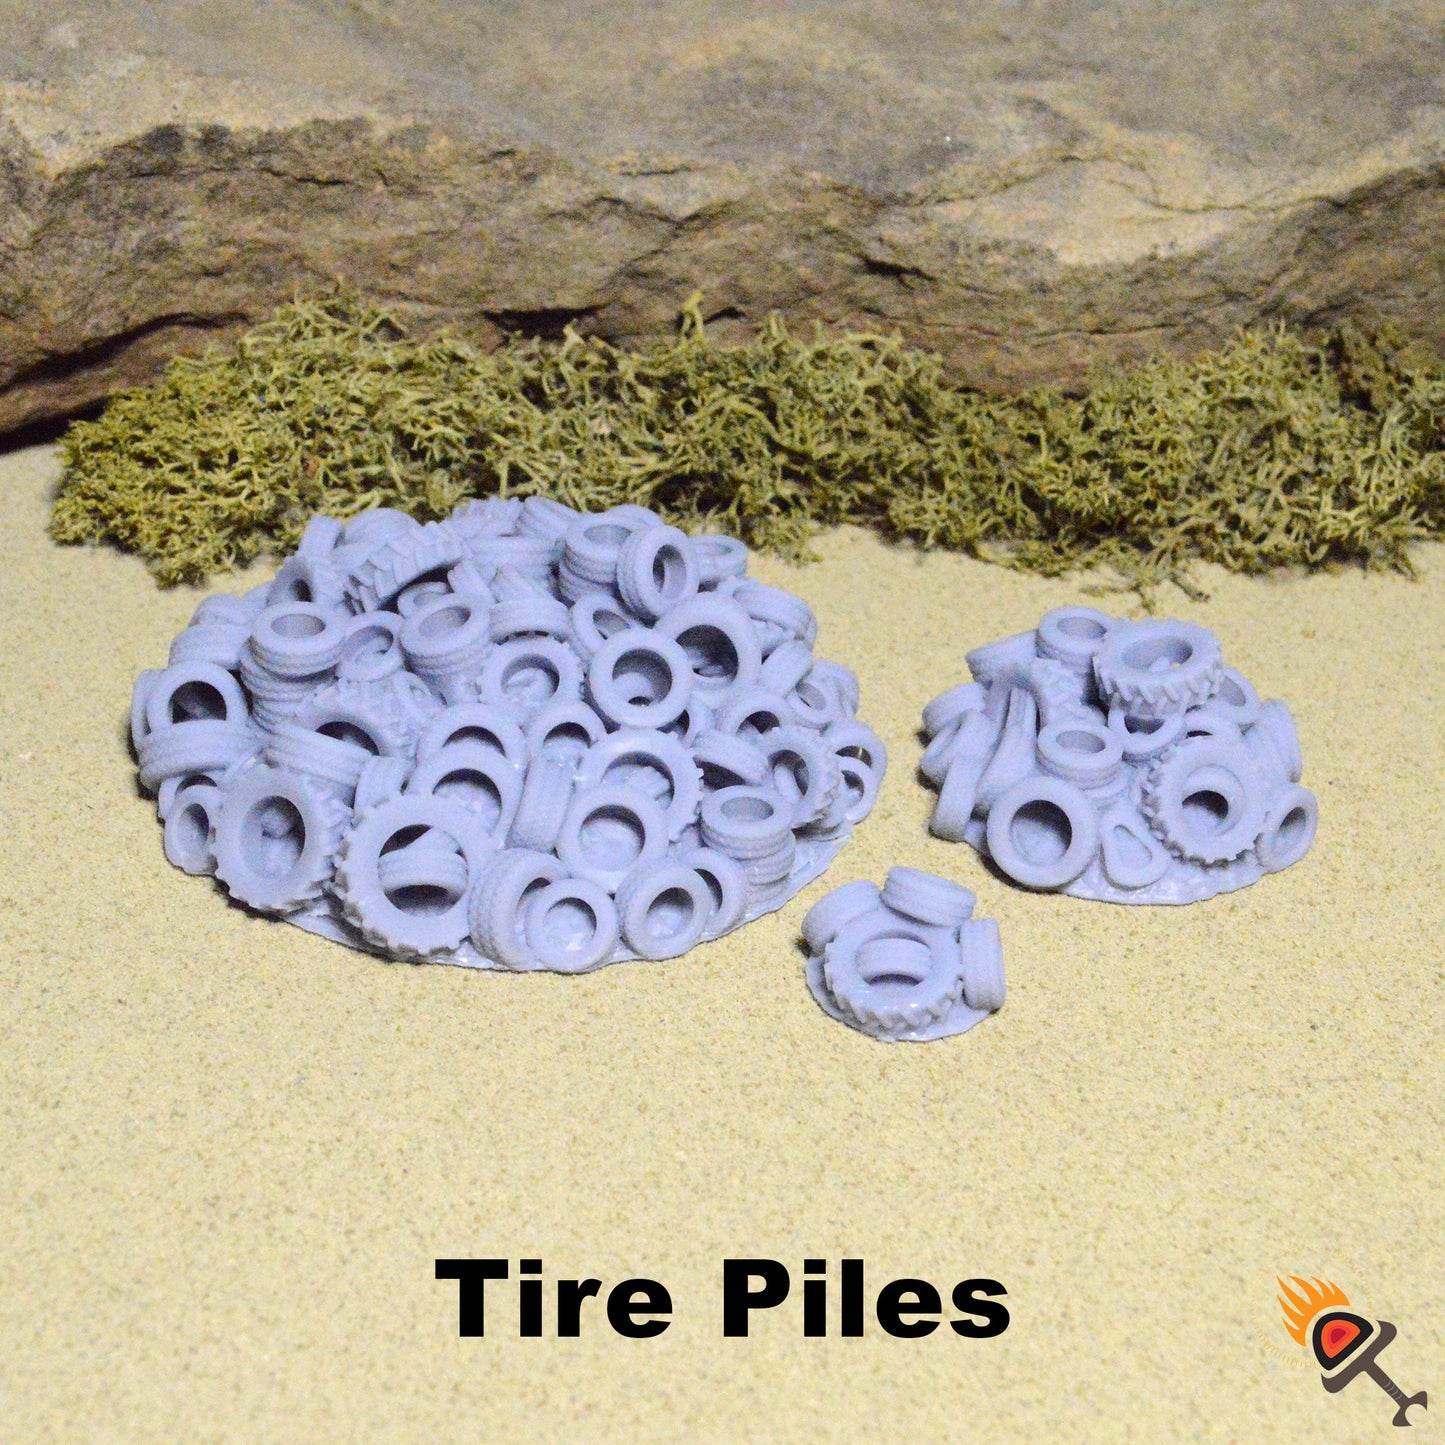 Tire Walls and Piles for Gaslands Terrain 20mm 28mm 32mm, Burning Tire Pile for Urban Fallout Post-Apocalyptic Barricades and Race Tracks